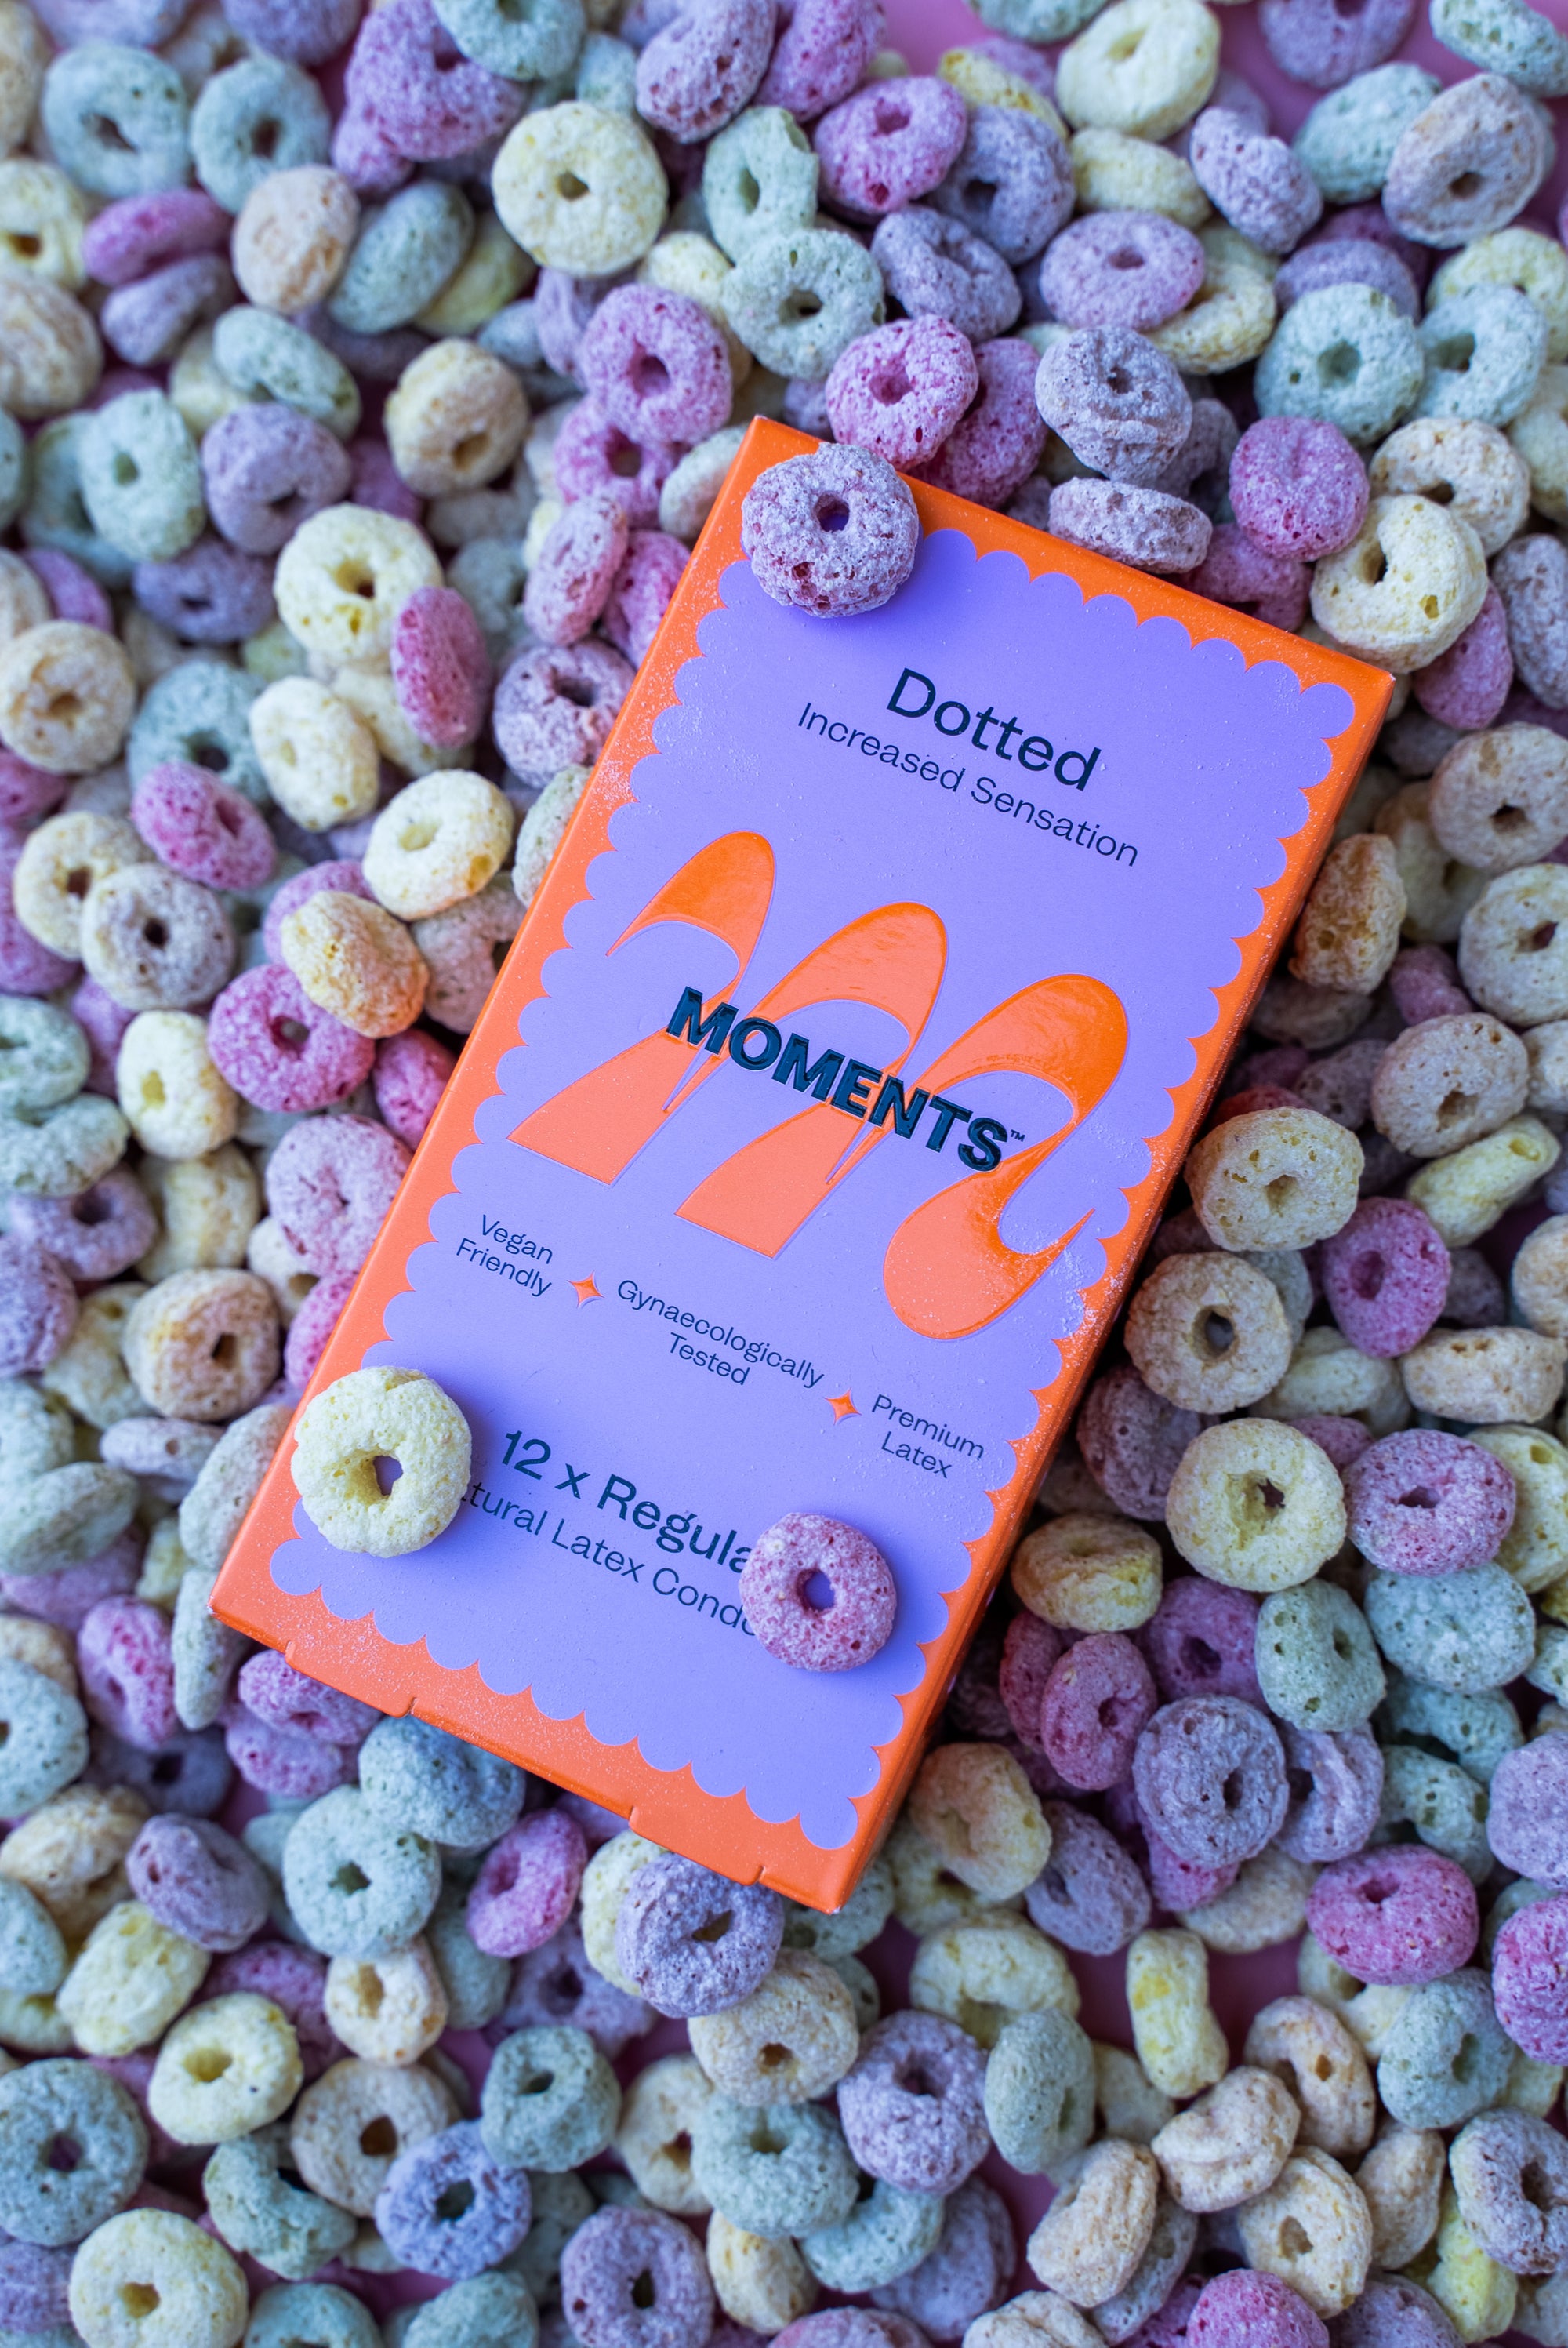 Moments Dotted condoms advertised as a new product with a fruit-themed design